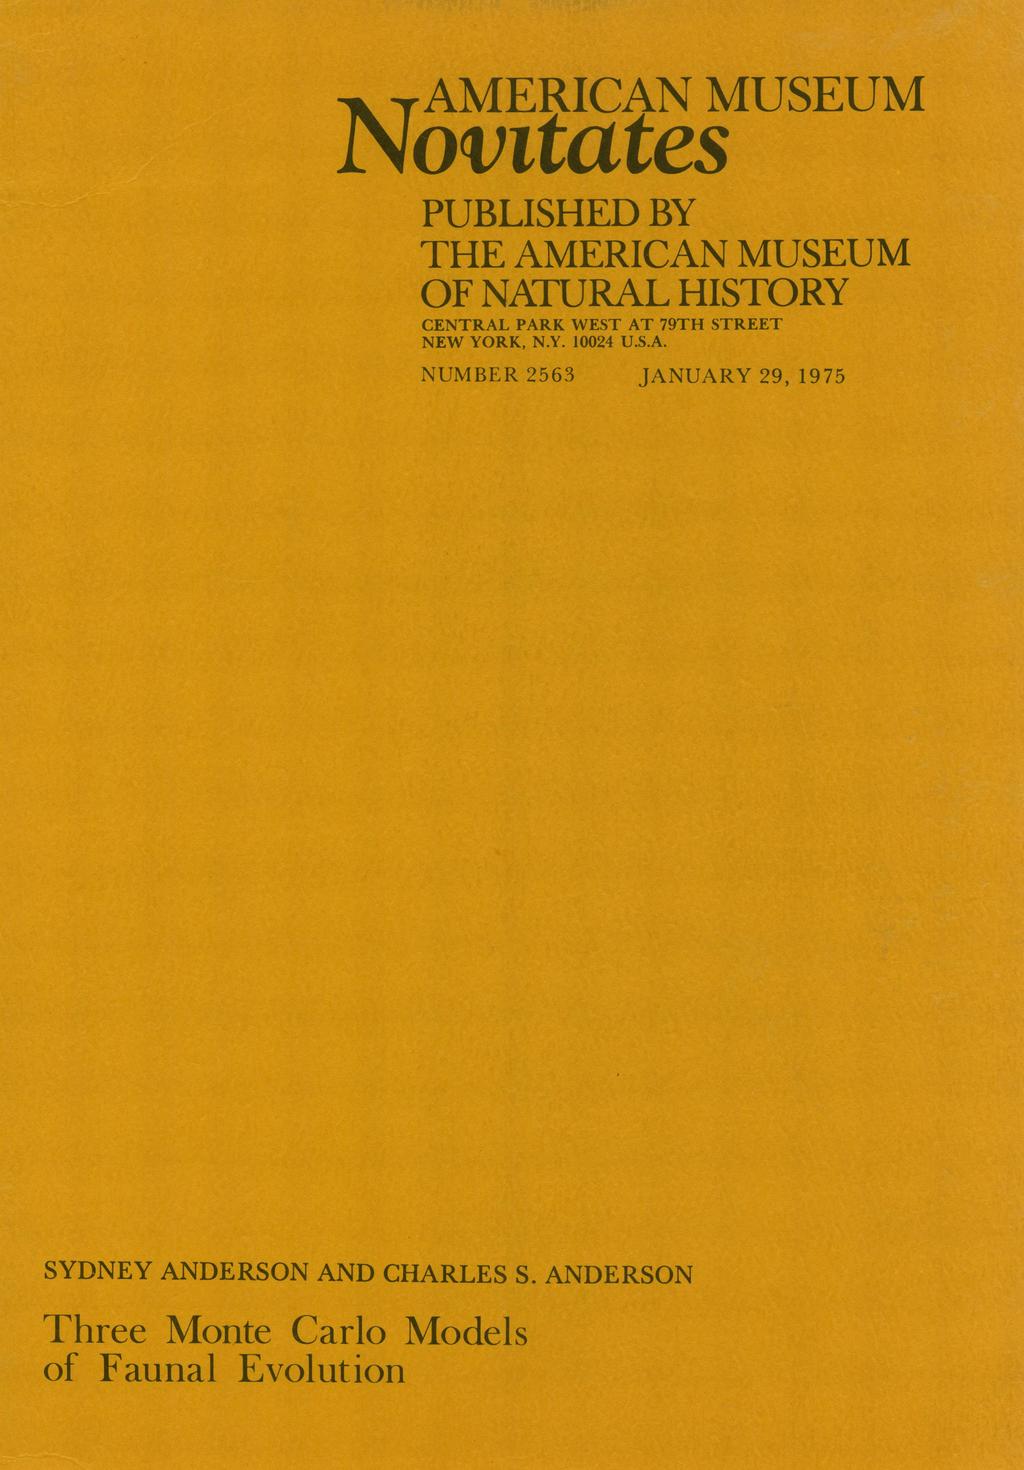 AMERICAN MUSEUM Notltates PUBLISHED BY THE AMERICAN MUSEUM NATURAL HISTORY OF CENTRAL PARK WEST AT 79TH STREET NEW YORK, N.Y. 10024 U.